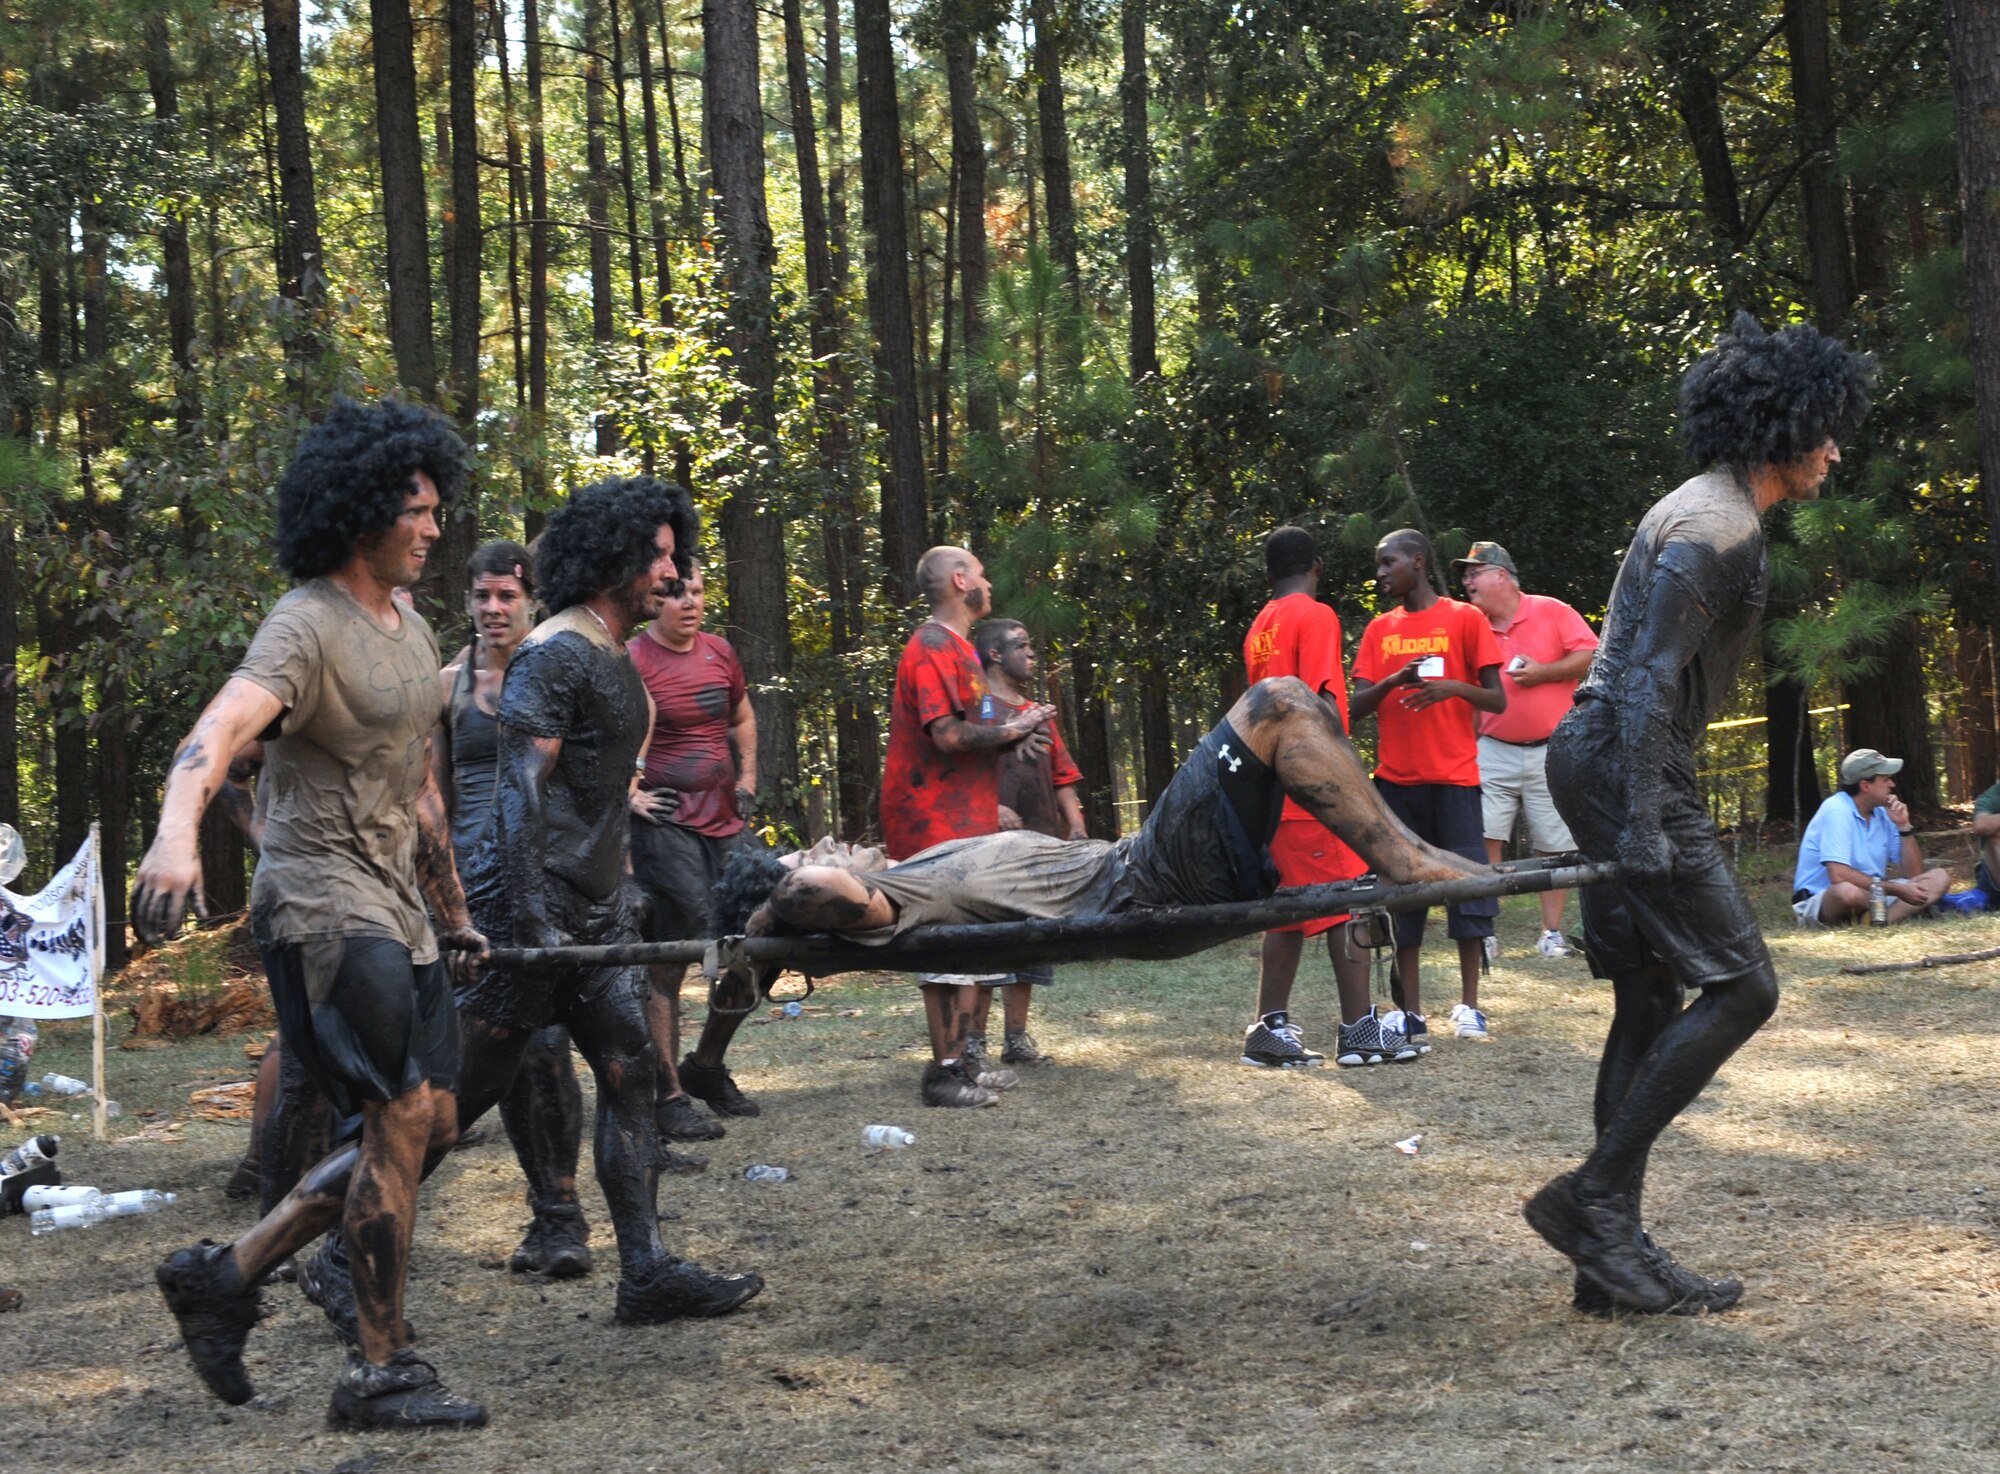 100925-F-4406D-127 SHAW AIR FORCE BASE, S.C.- As the last obstacle of the 17th Annual Mud Run, a team carries a member of their team on the "Stretcher Carry" in Gaston, S.C., Sept. 25, 2010. The USMC Mud Run is held annually to raise money for marines and their families who have been killed on duty. Its profits also go towards scholarships and local events which promote the Marine Corps in the community. (U.S. Air Force photo/Airman 1st Class Tabatha L. Duarte (Released)